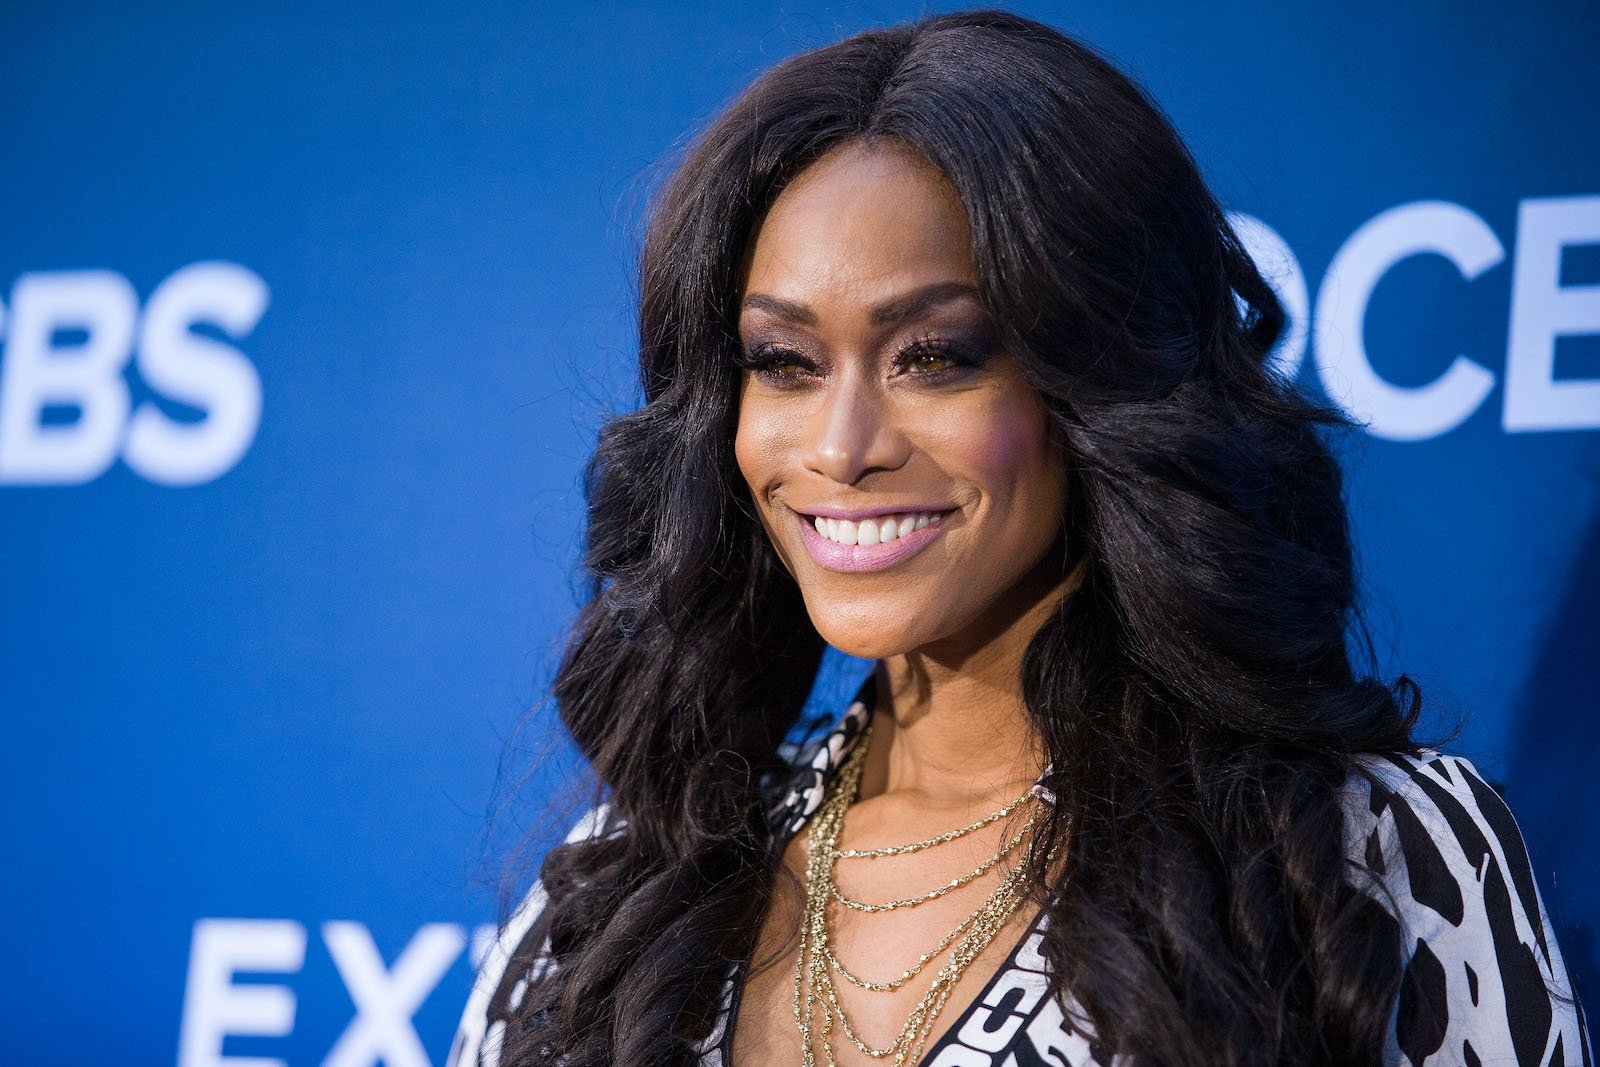 Tami Roman from The Real World: Los Angeles at a red carpet premiere